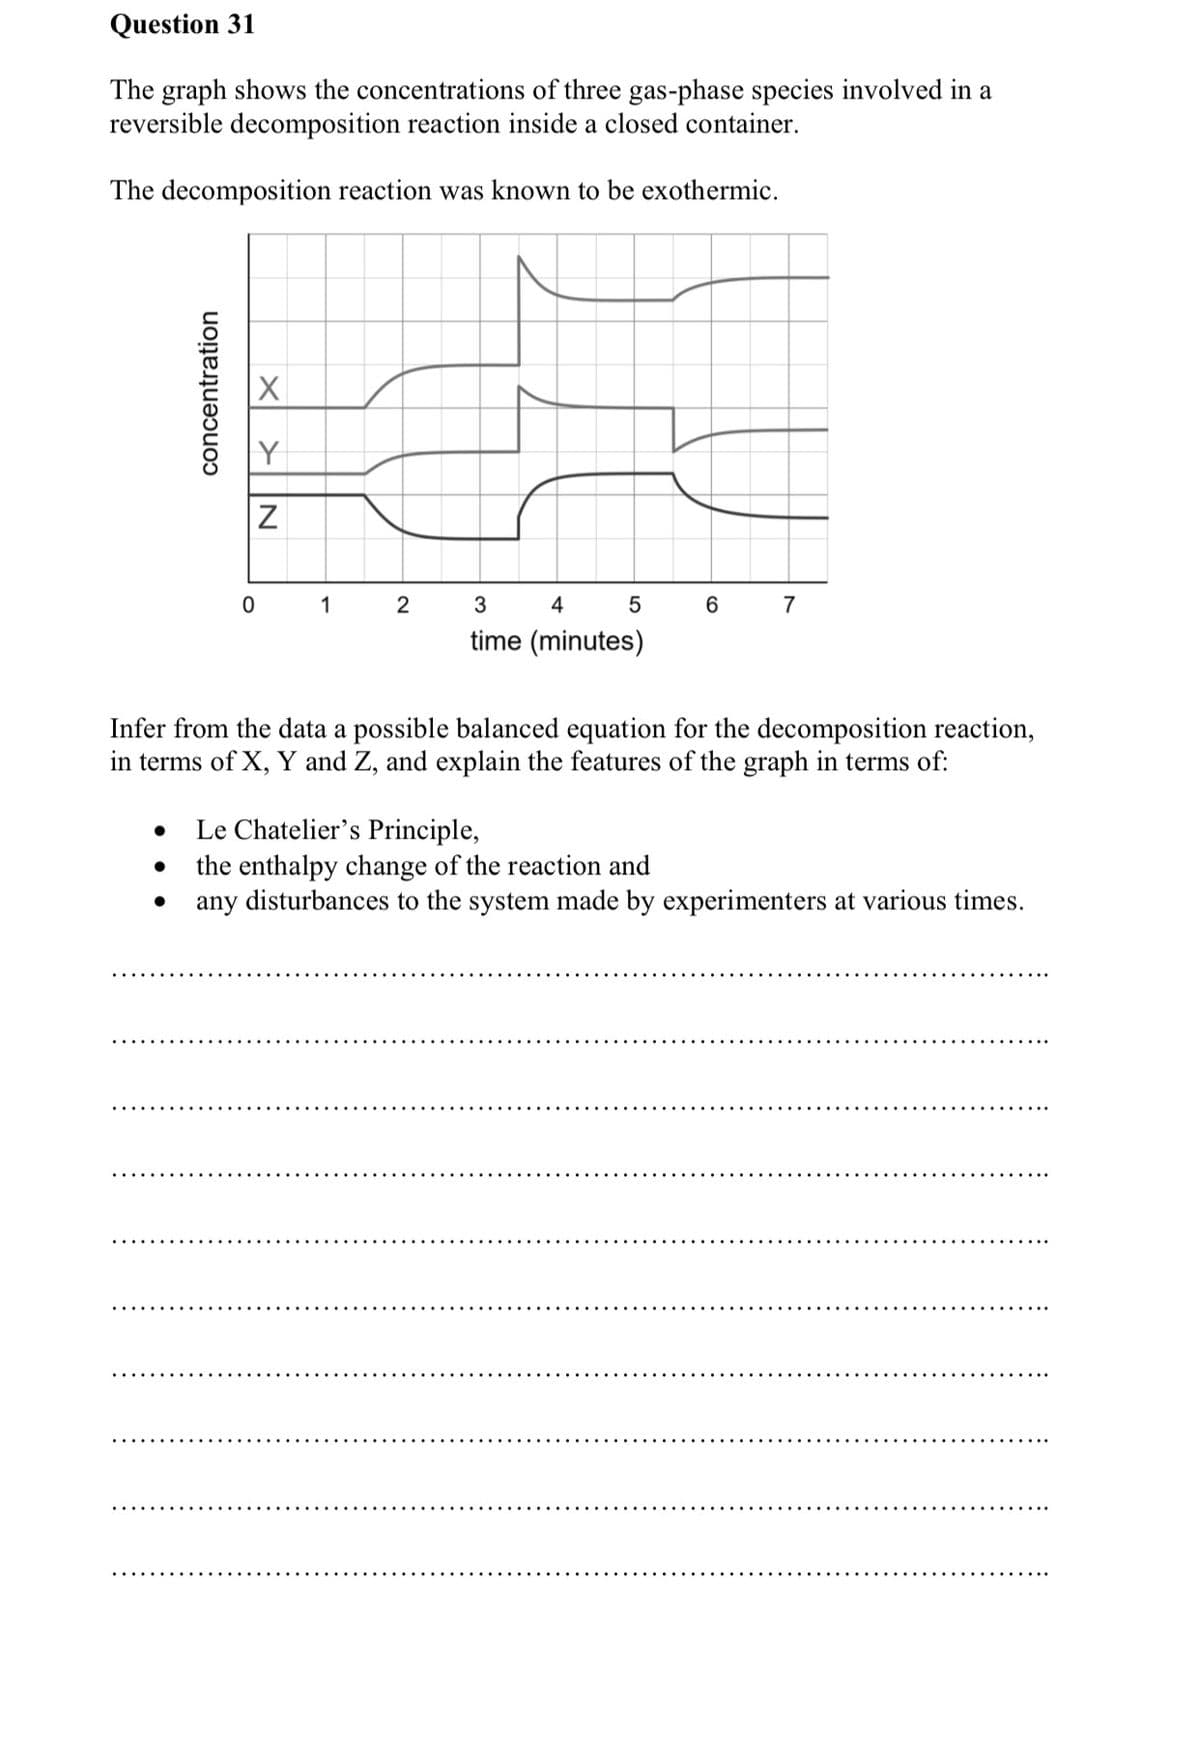 Question 31
The graph shows the concentrations of three gas-phase species involved in a
reversible decomposition reaction inside a closed container.
The decomposition reaction was known to be exothermic.
1
2
4
7
time (minutes)
Infer from the data a possible balanced equation for the decomposition reaction,
in terms of X, Y and Z, and explain the features of the graph in terms of:
Le Chatelier's Principle,
the enthalpy change of the reaction and
any disturbances to the system made by experimenters at various times.
concentration
